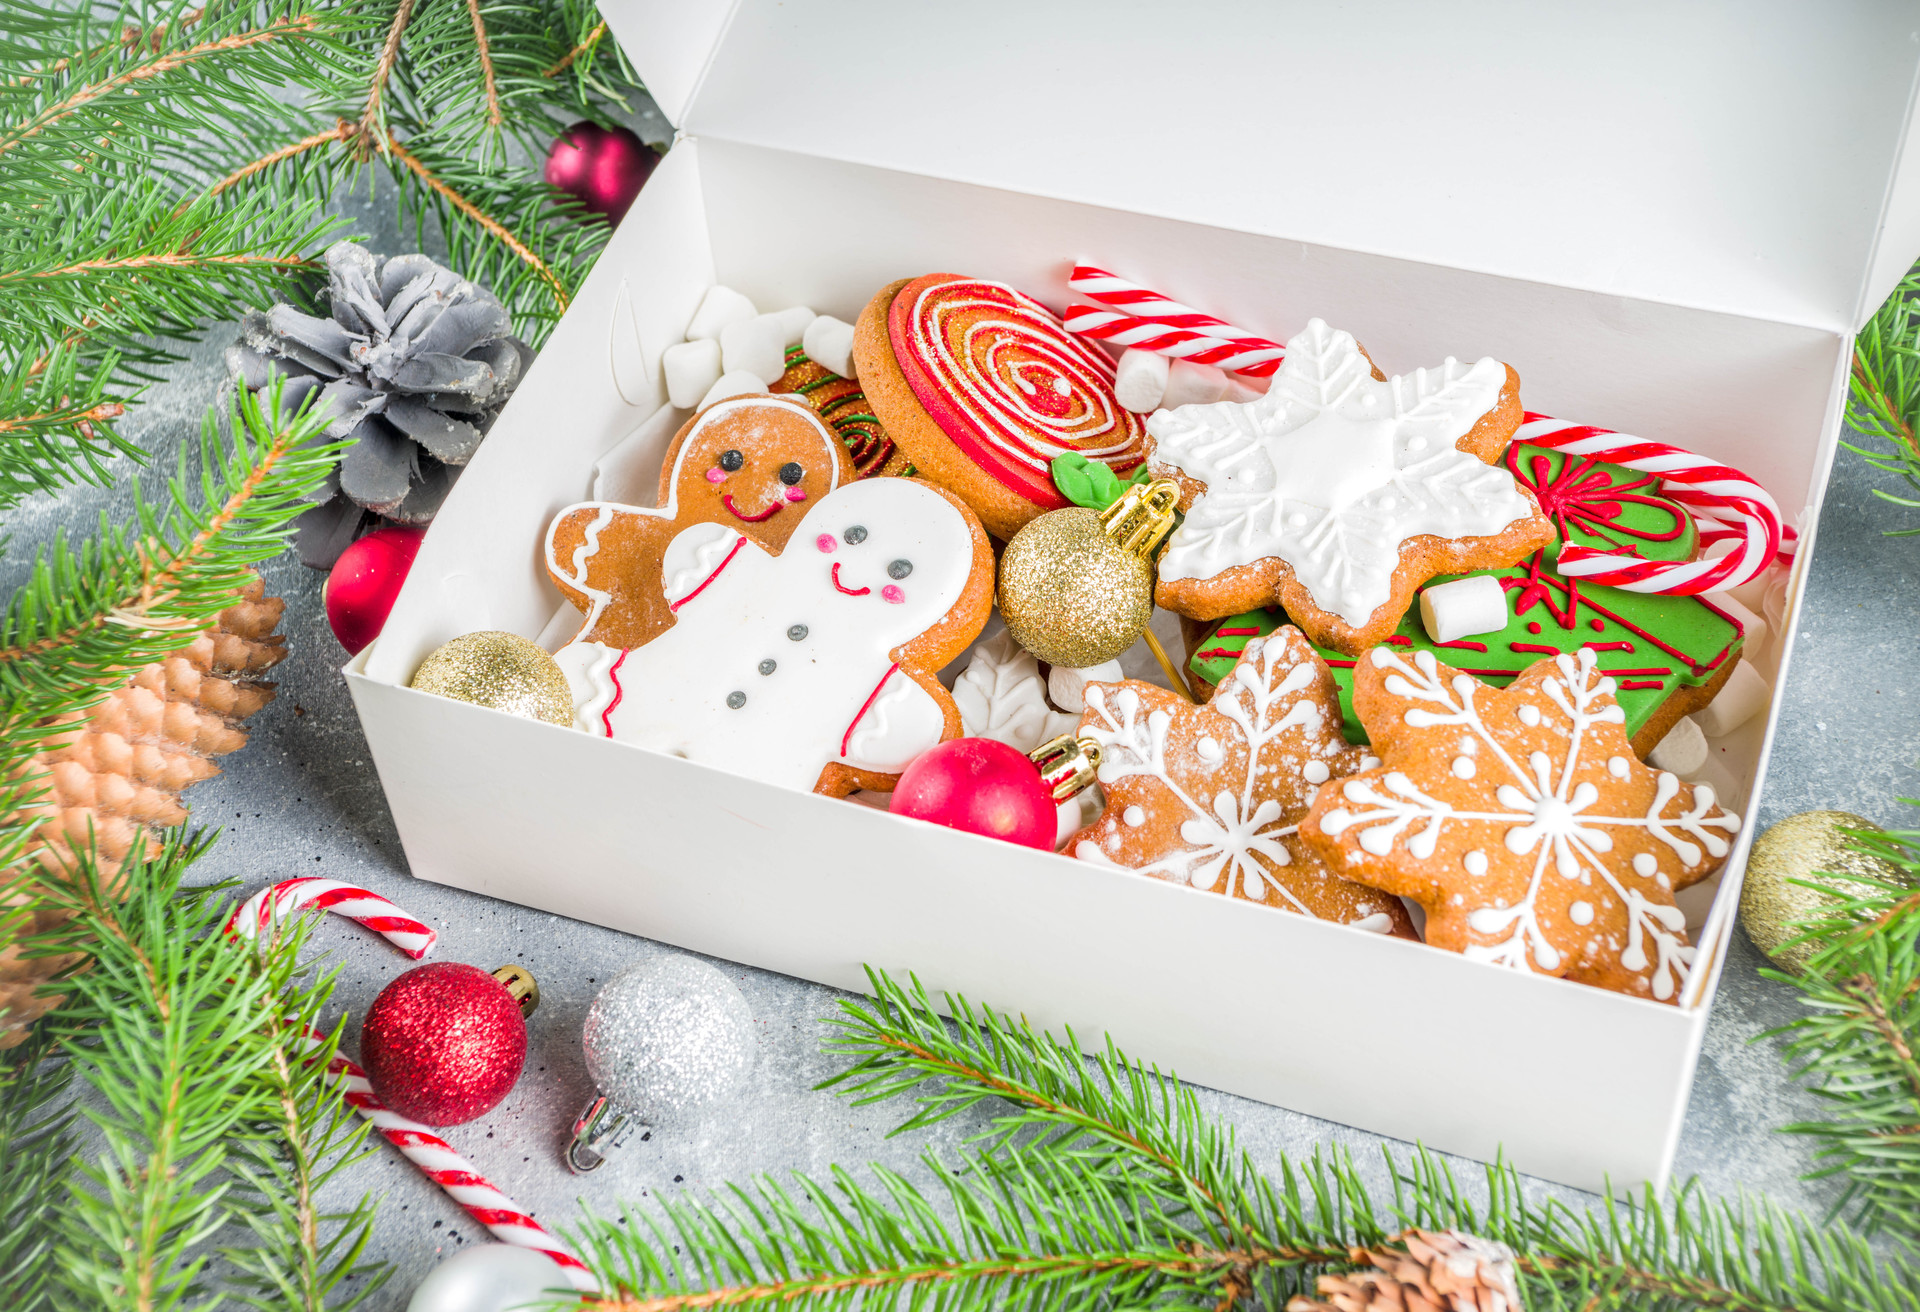 Homemade christmas sugar and gingerbread cookies decorated with colorful icing on grey stone background with Christmas tree branches and decorations; Shutterstock ID 1591003834; Purpose: Virtual Christmas Guides; Brand (KAYAK, Momondo, Any): Kayak; Client/Licensee: KAYAK